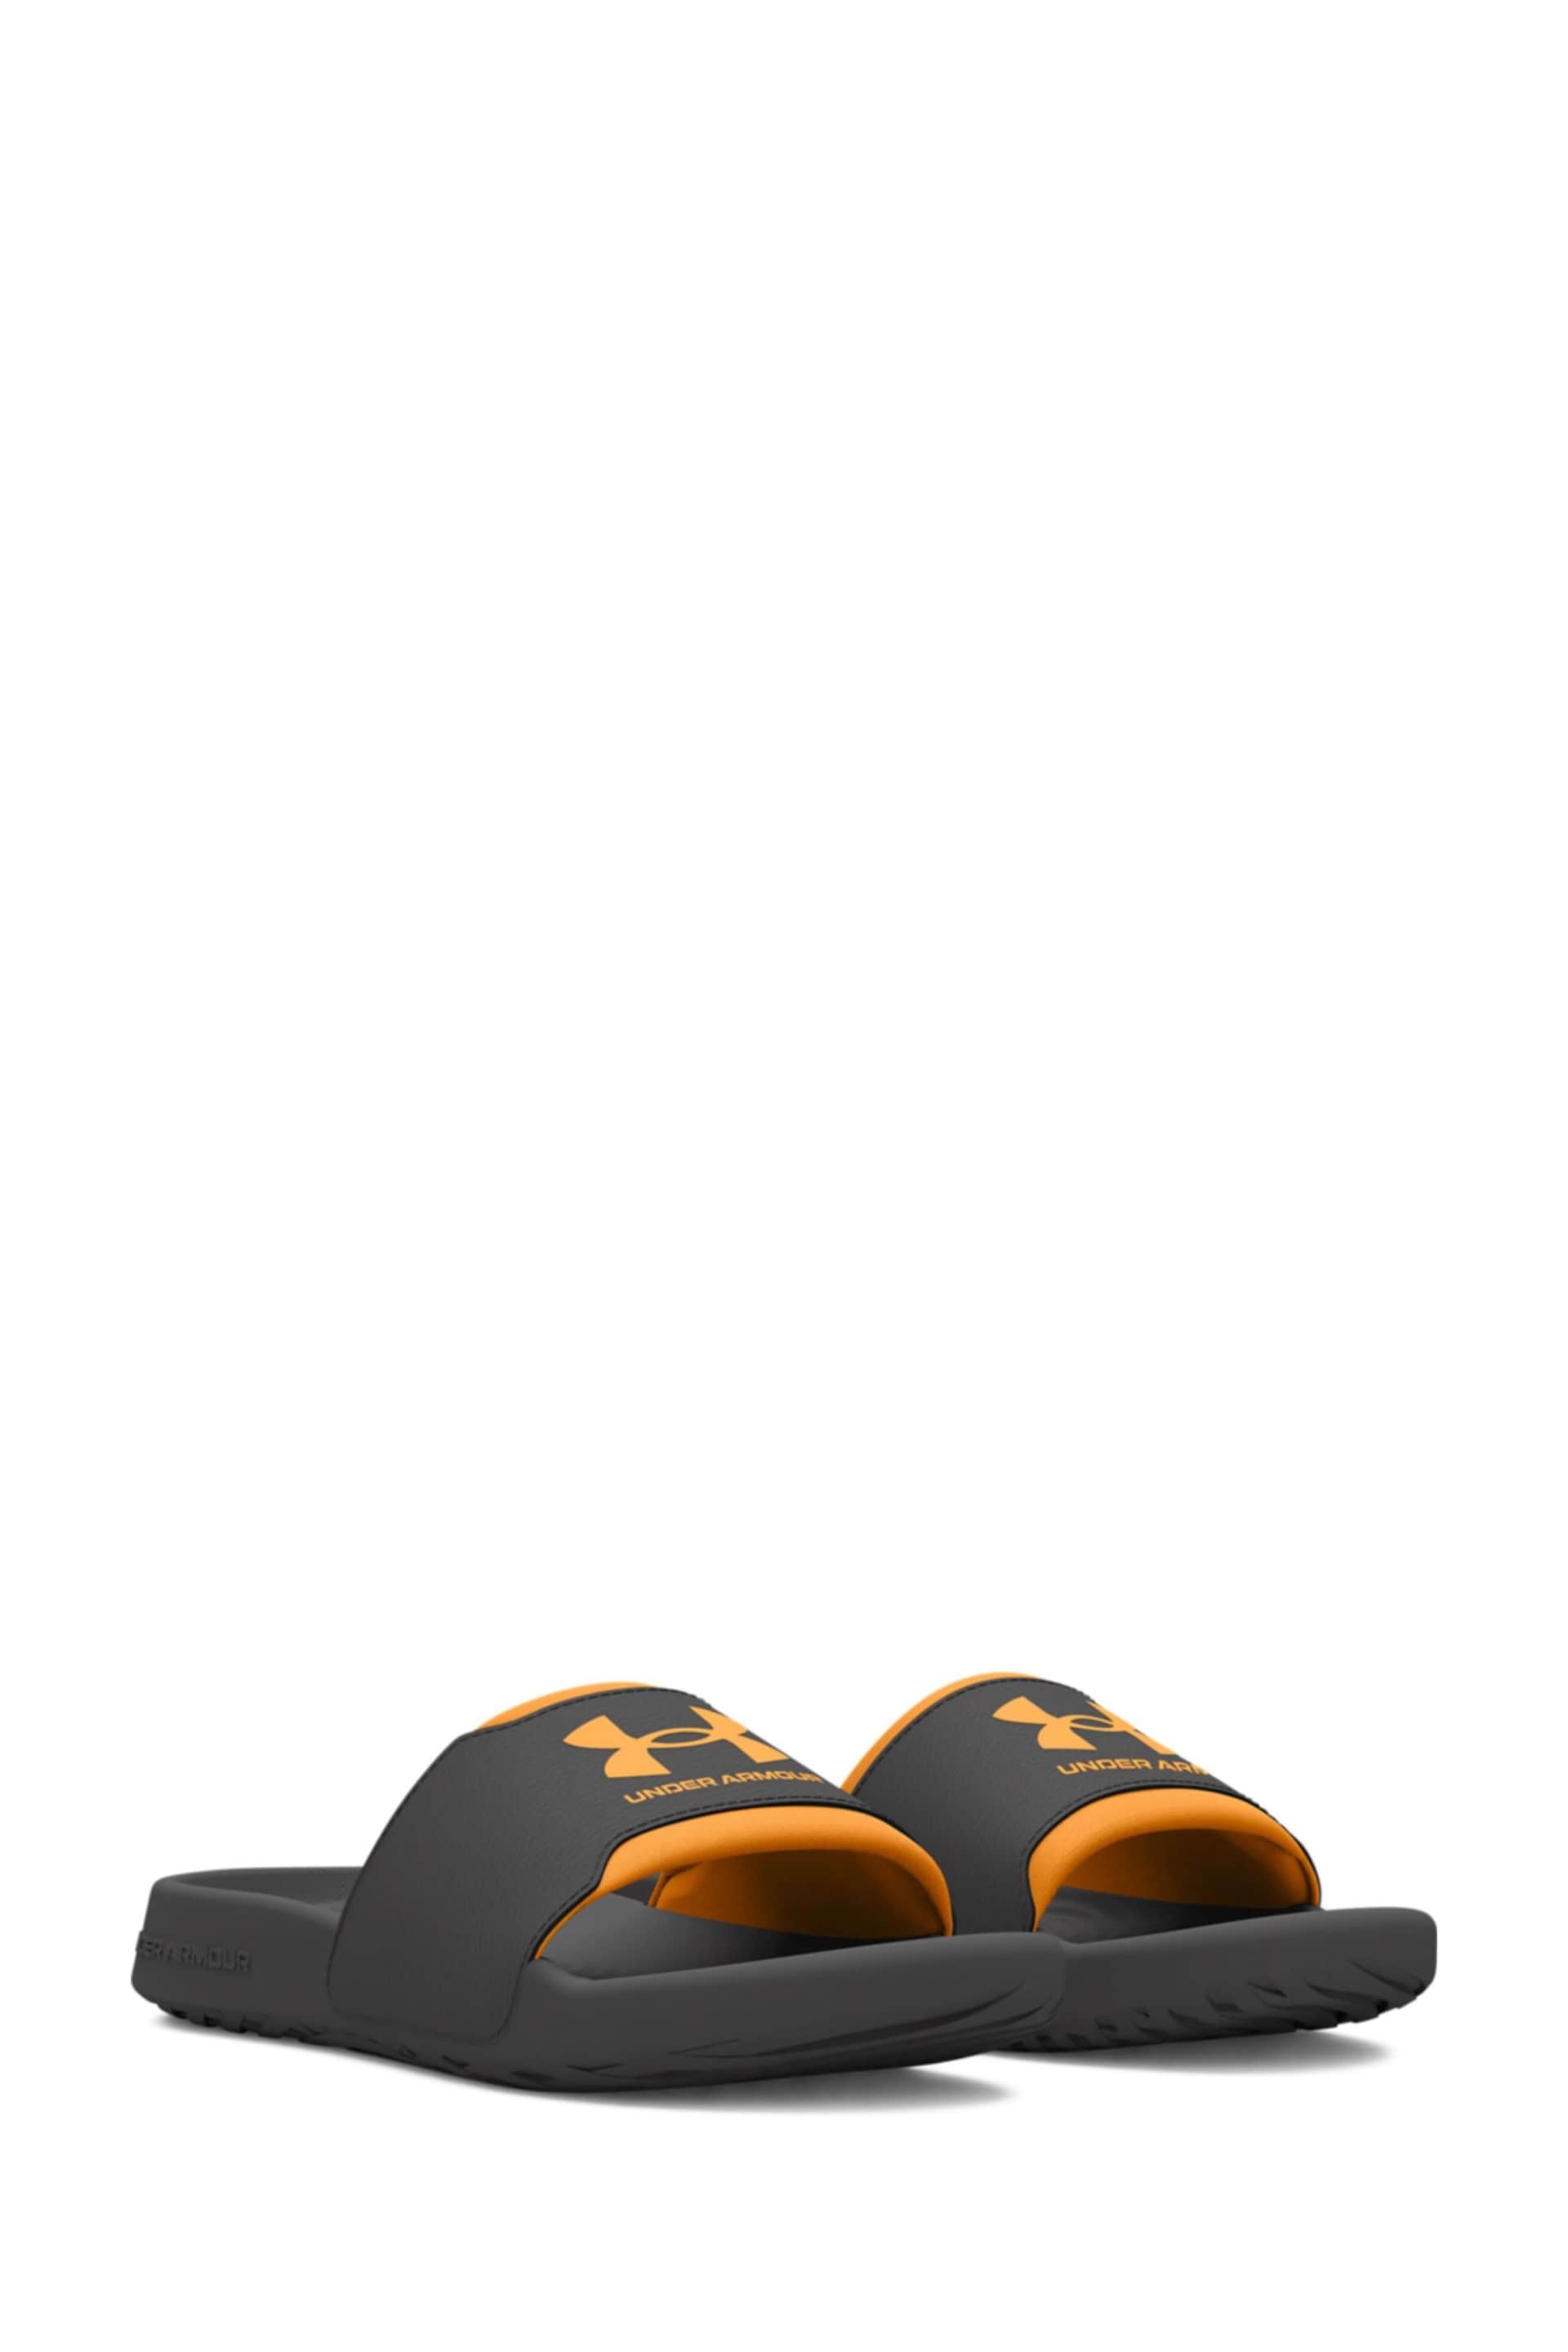 Under Armour Grey M Ignite Select Sandals - Image 3 of 5